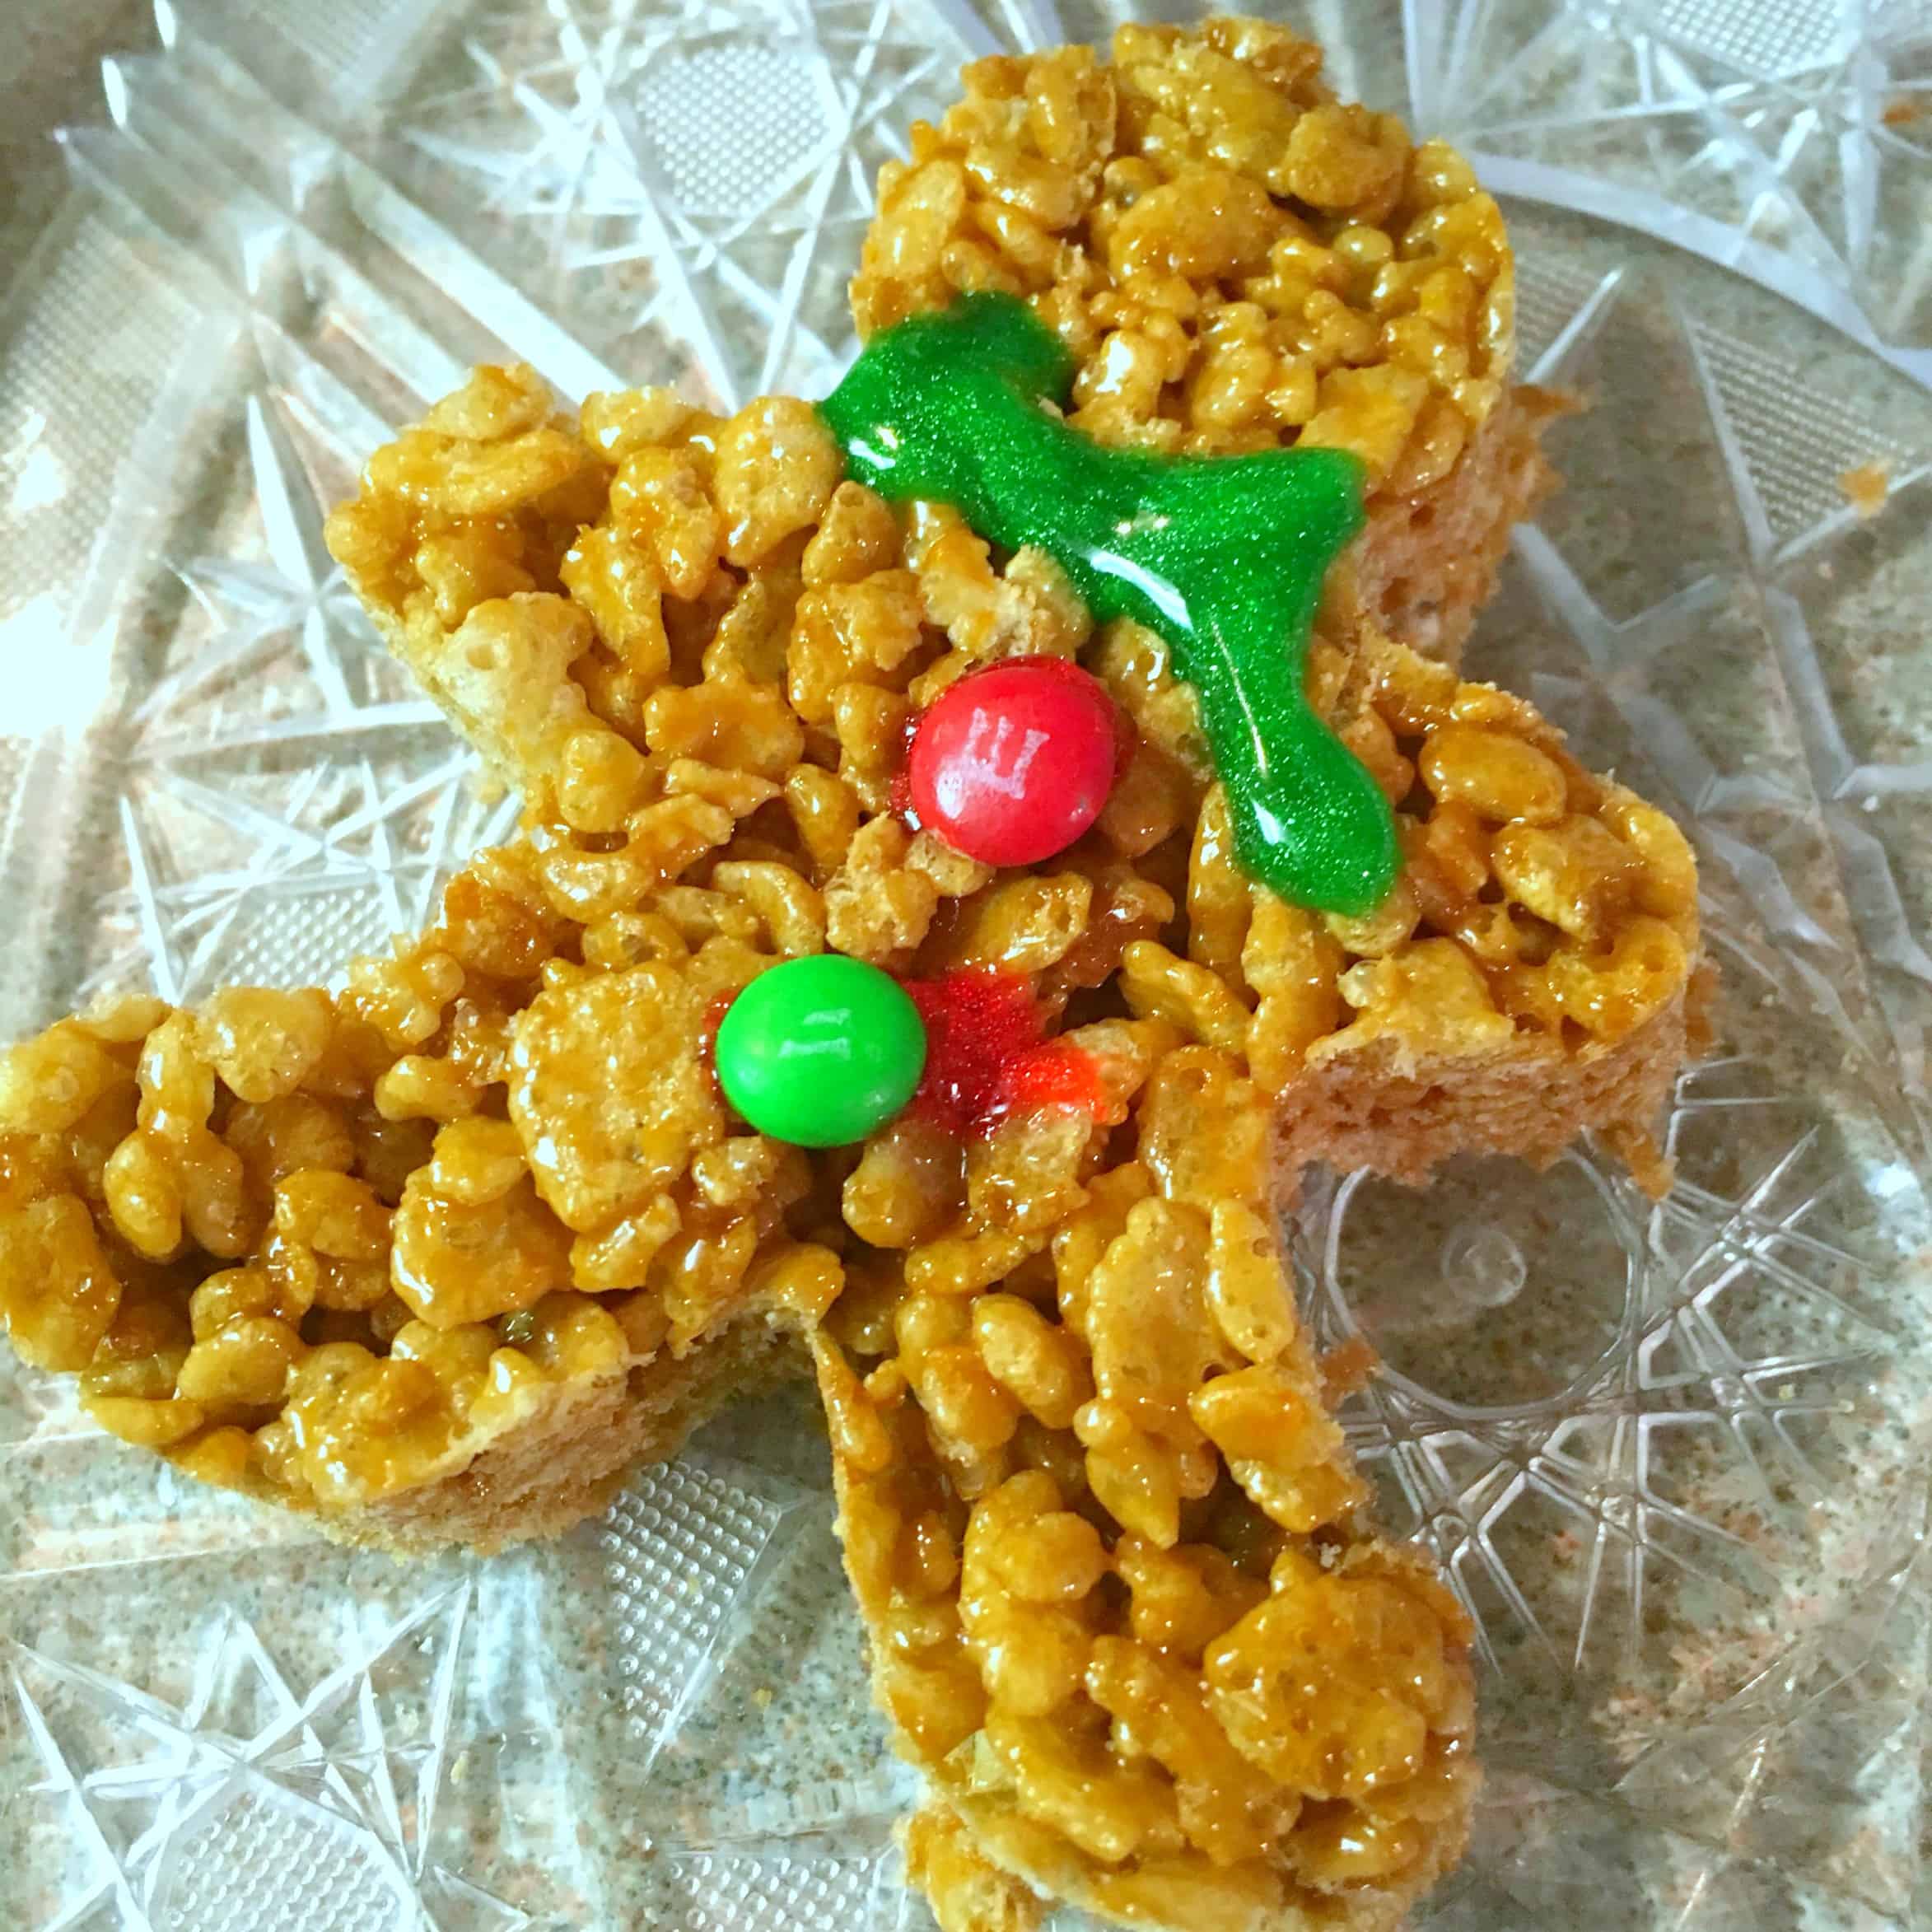 These gingerbread man rice krispie treats are super easy for kids to make and are adorable and festive for the holidays! Perfect for a kids' party.